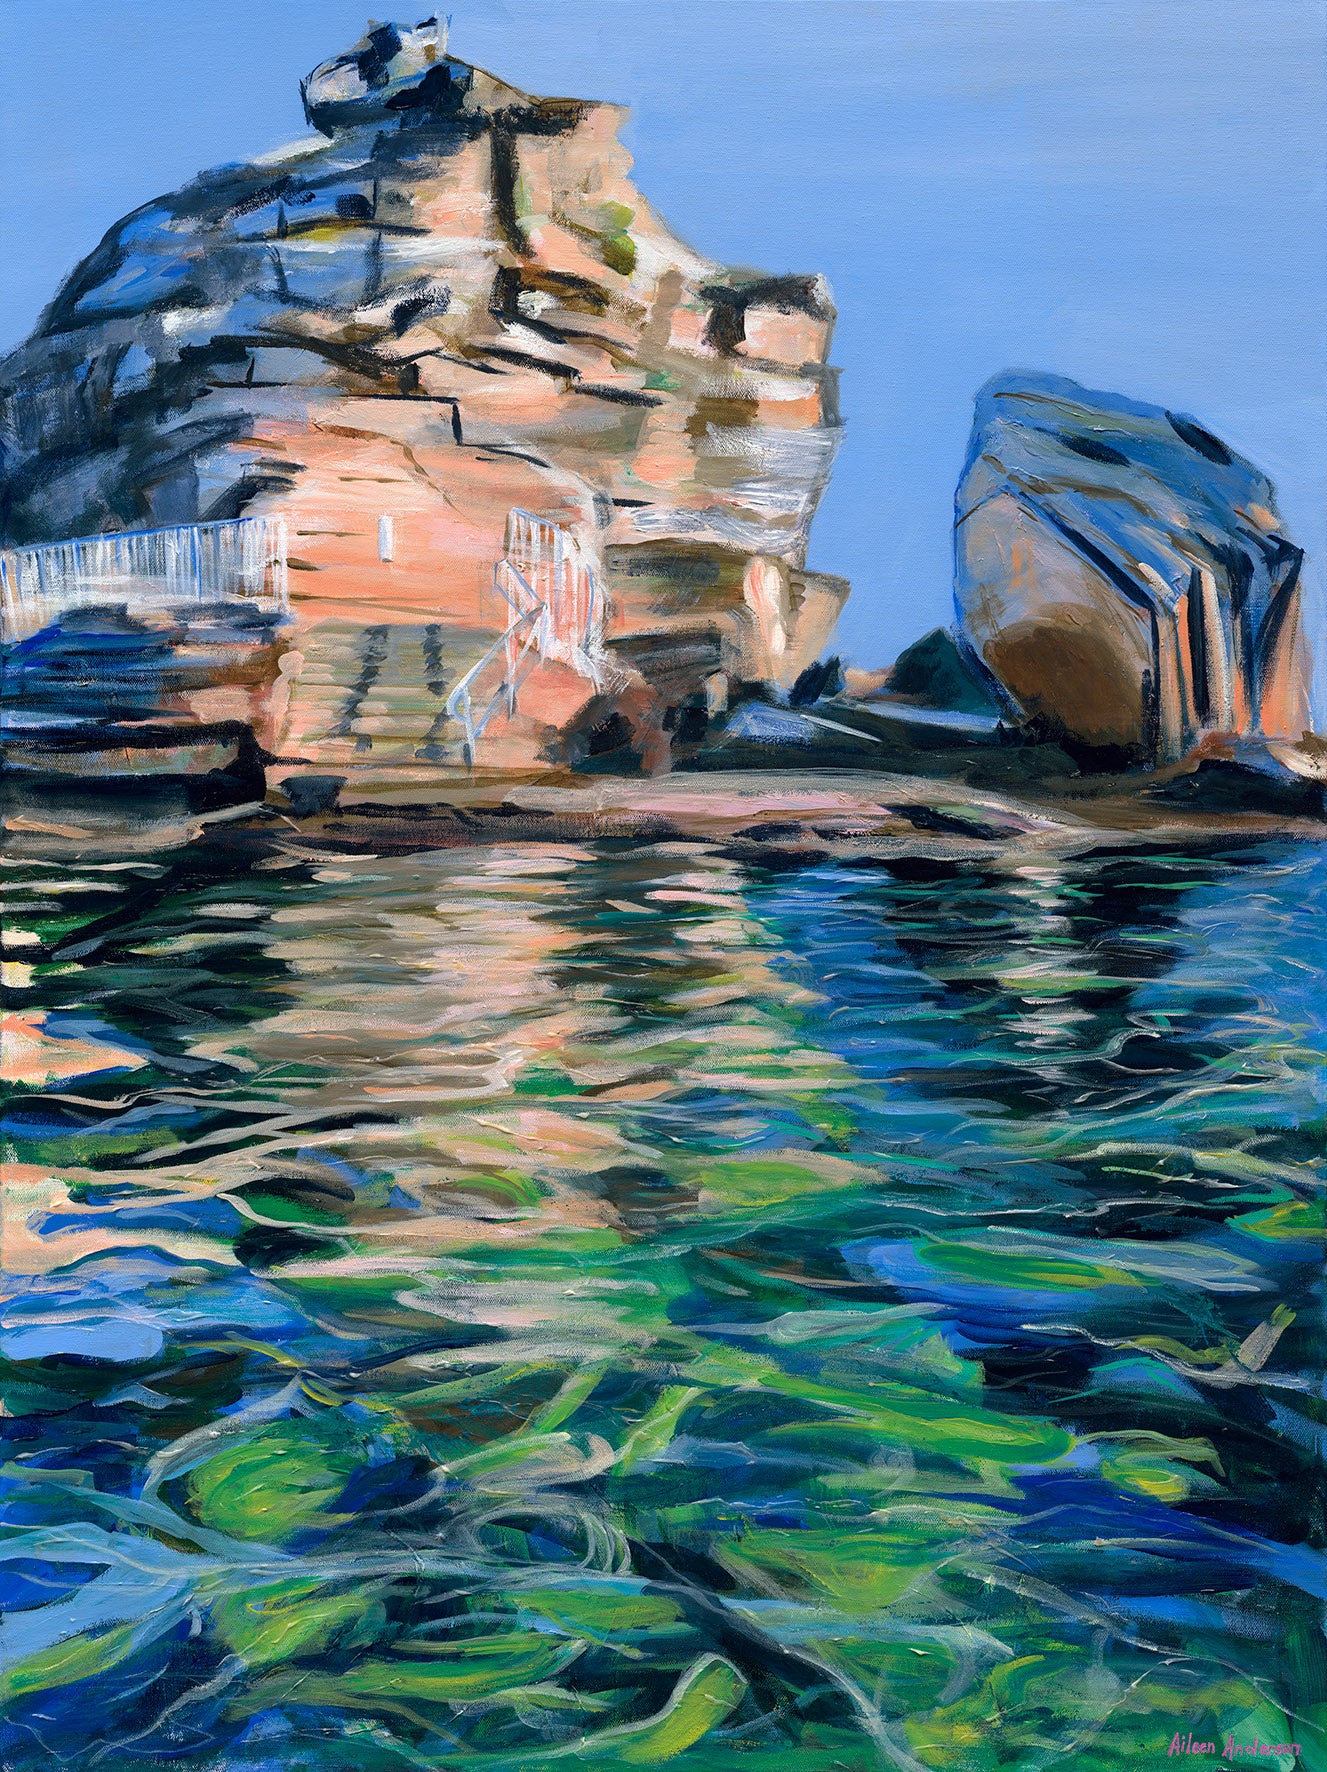 Giles Baths Coogee Painting by Aileen Anderson (copyright)